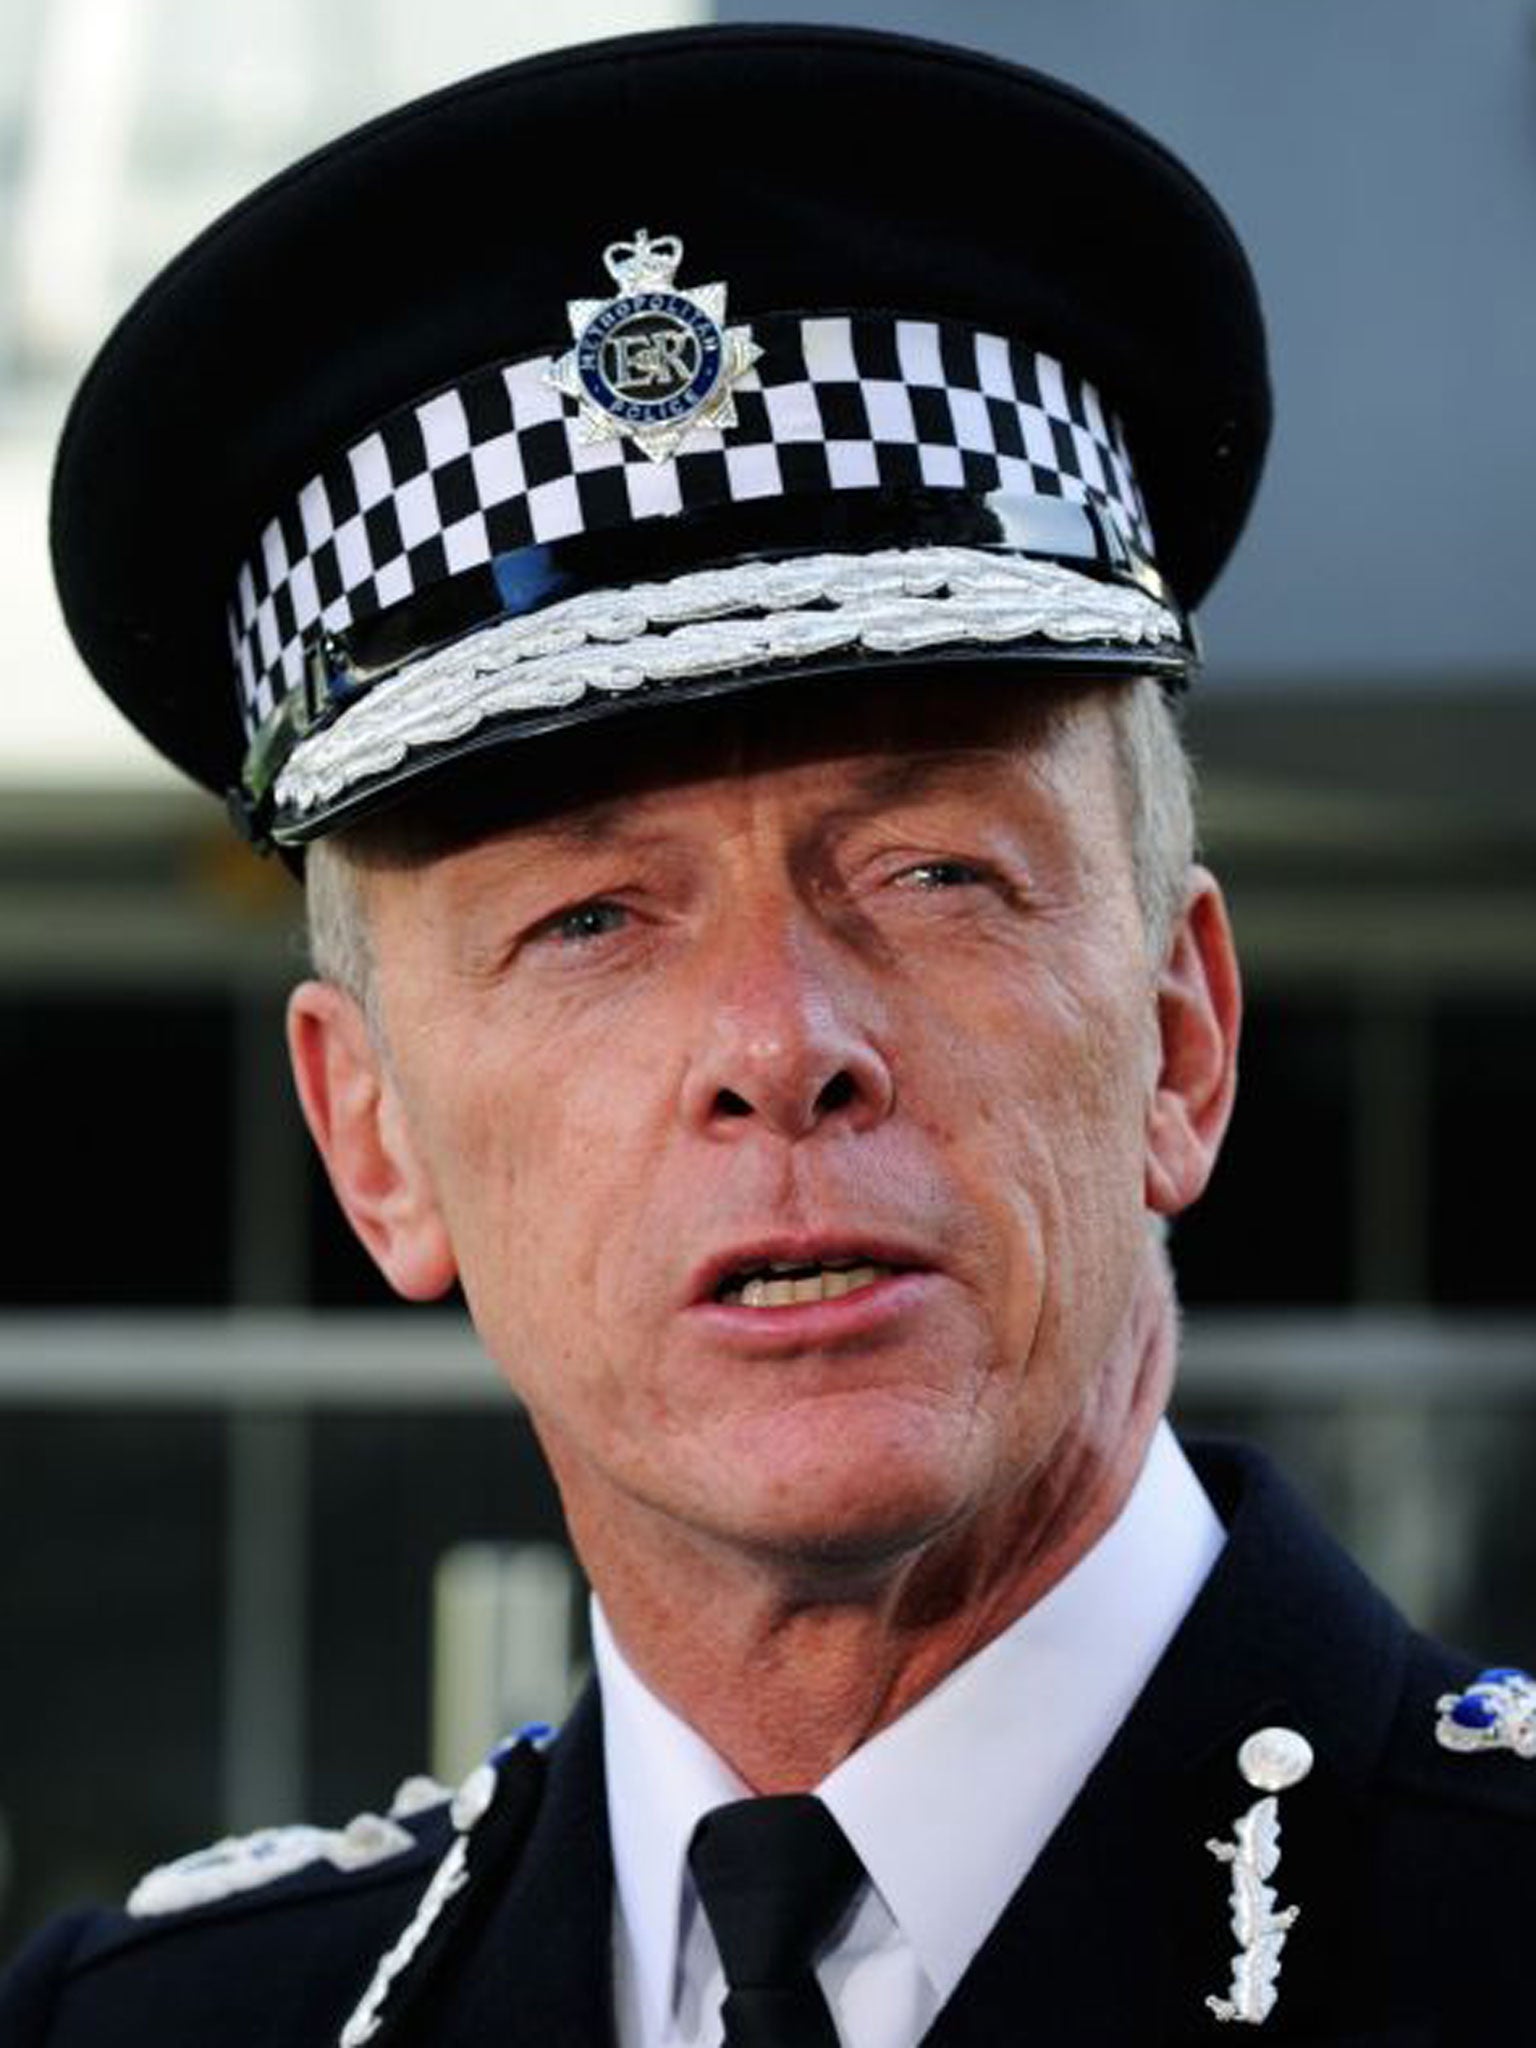 Sir Bernard Hogan-Howe has made an impassioned plea for unity after a fire in an Islamic boarding school in south-east London three days after a fire at a community centre in Muswell Hill, north London